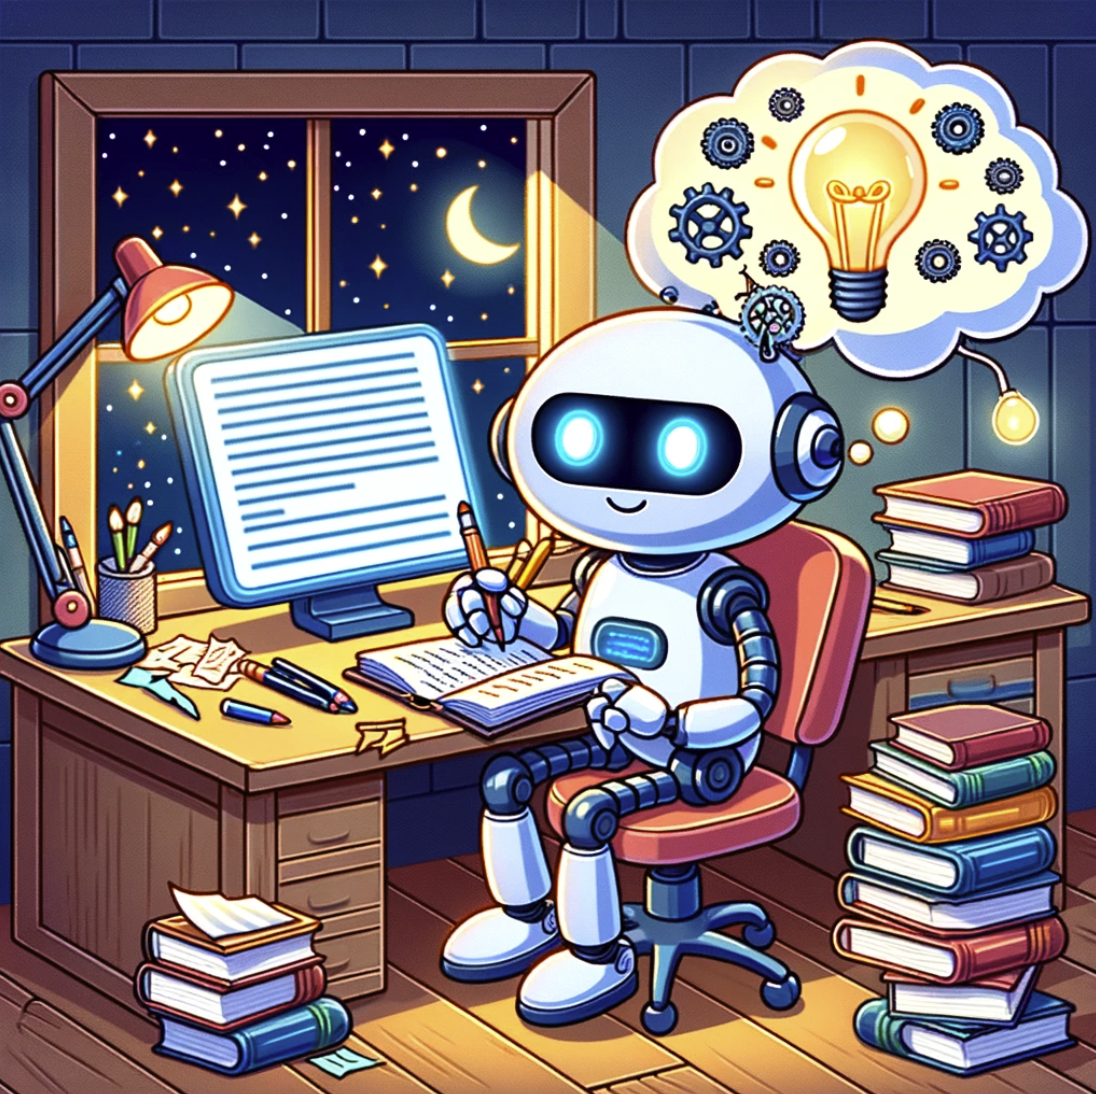 image showcasing ChatGPT as a friendly robot assisting in the book-writing process, surrounded by the tools and inspirations of a writer's workshop.